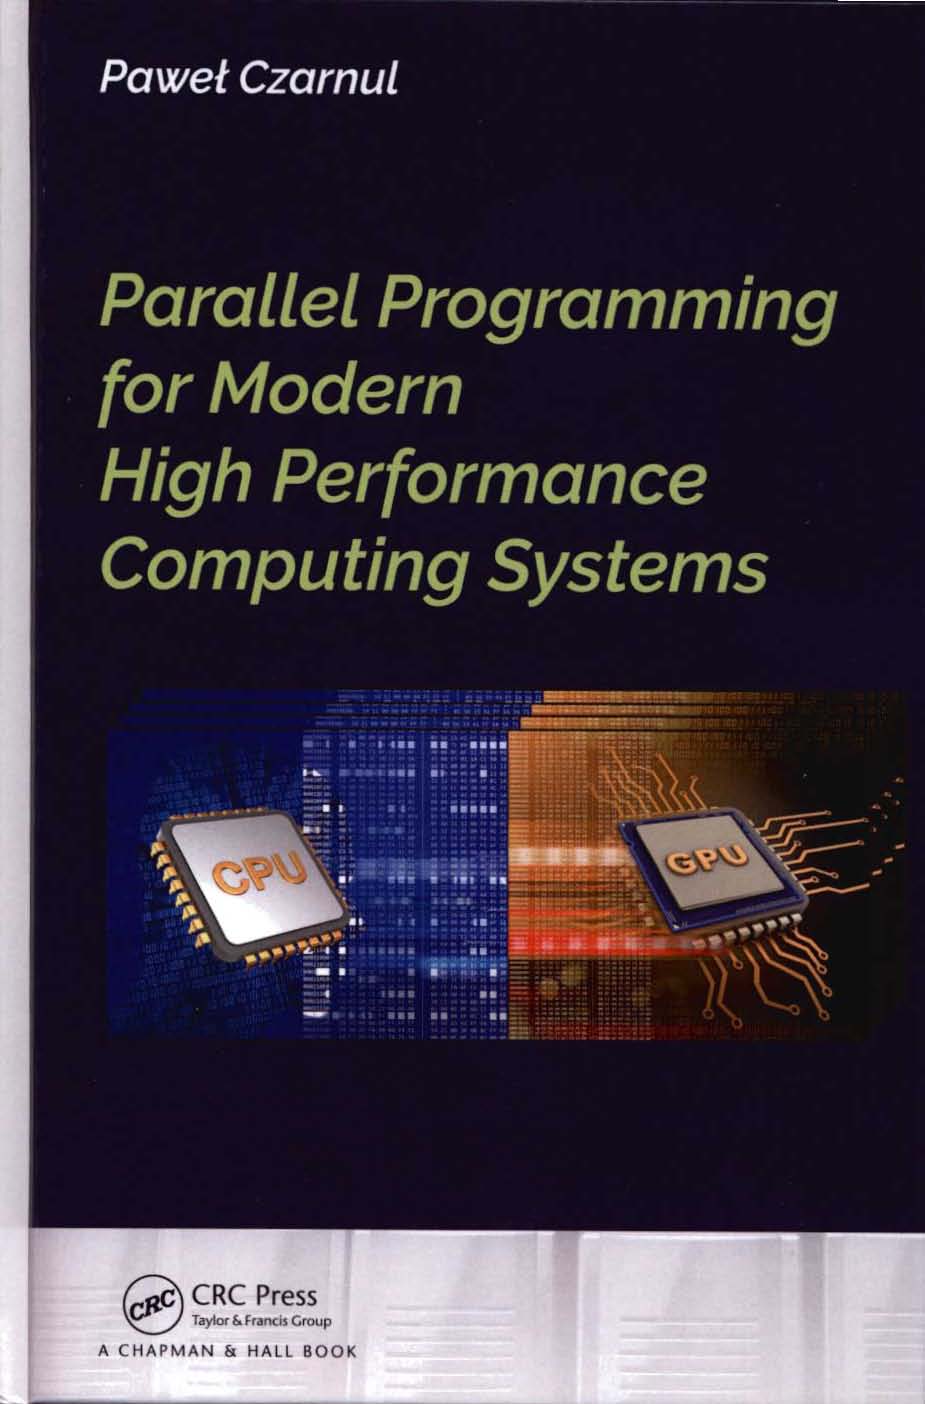 High performance parallel interface